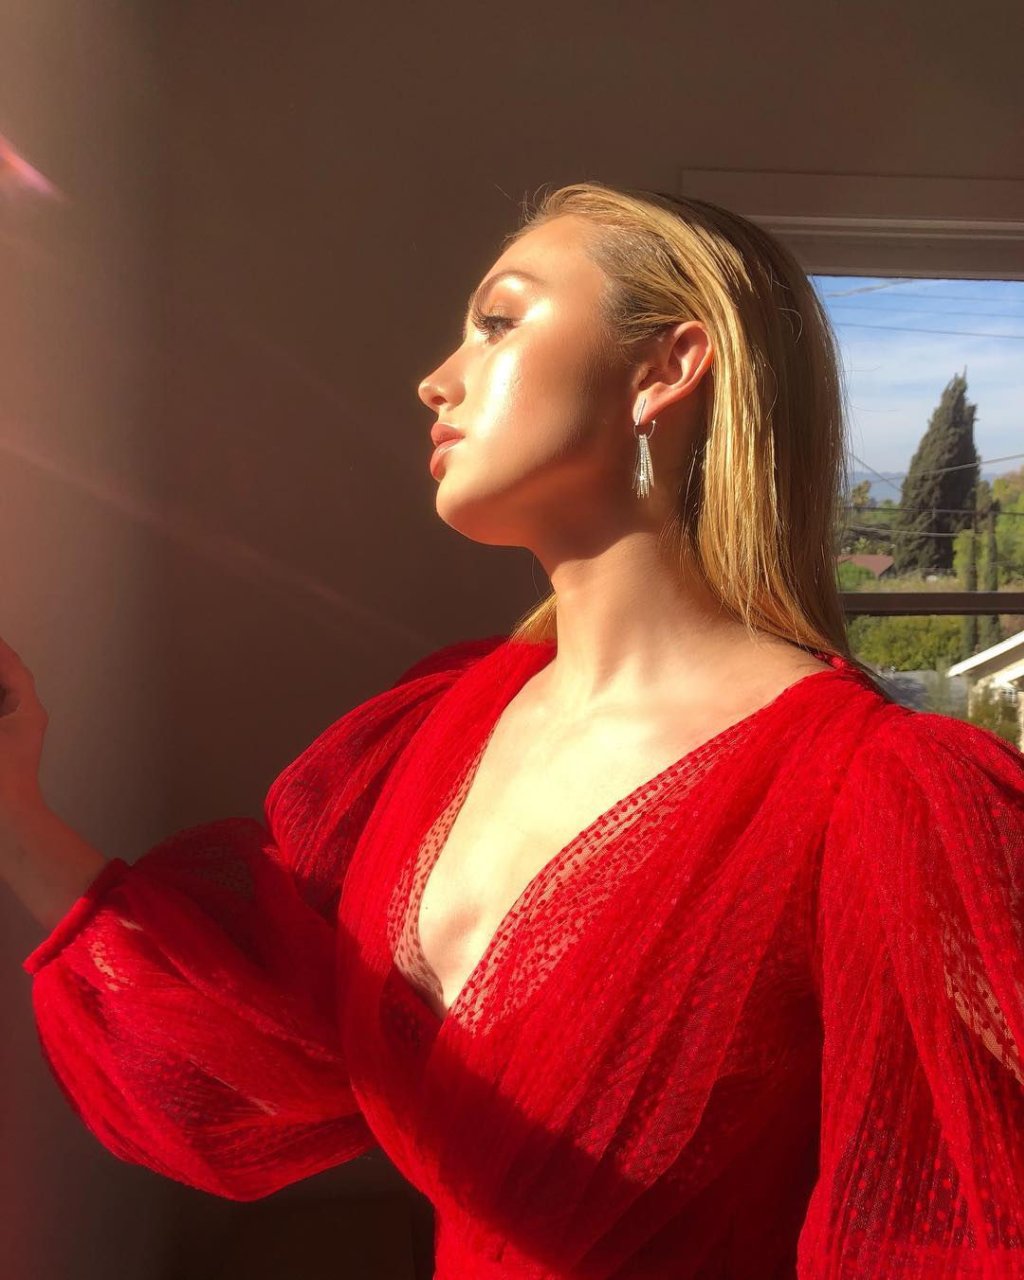 Leggy Stunner Peyton List Shows Her Cleavage and Legs in a Sexy Red Outfit